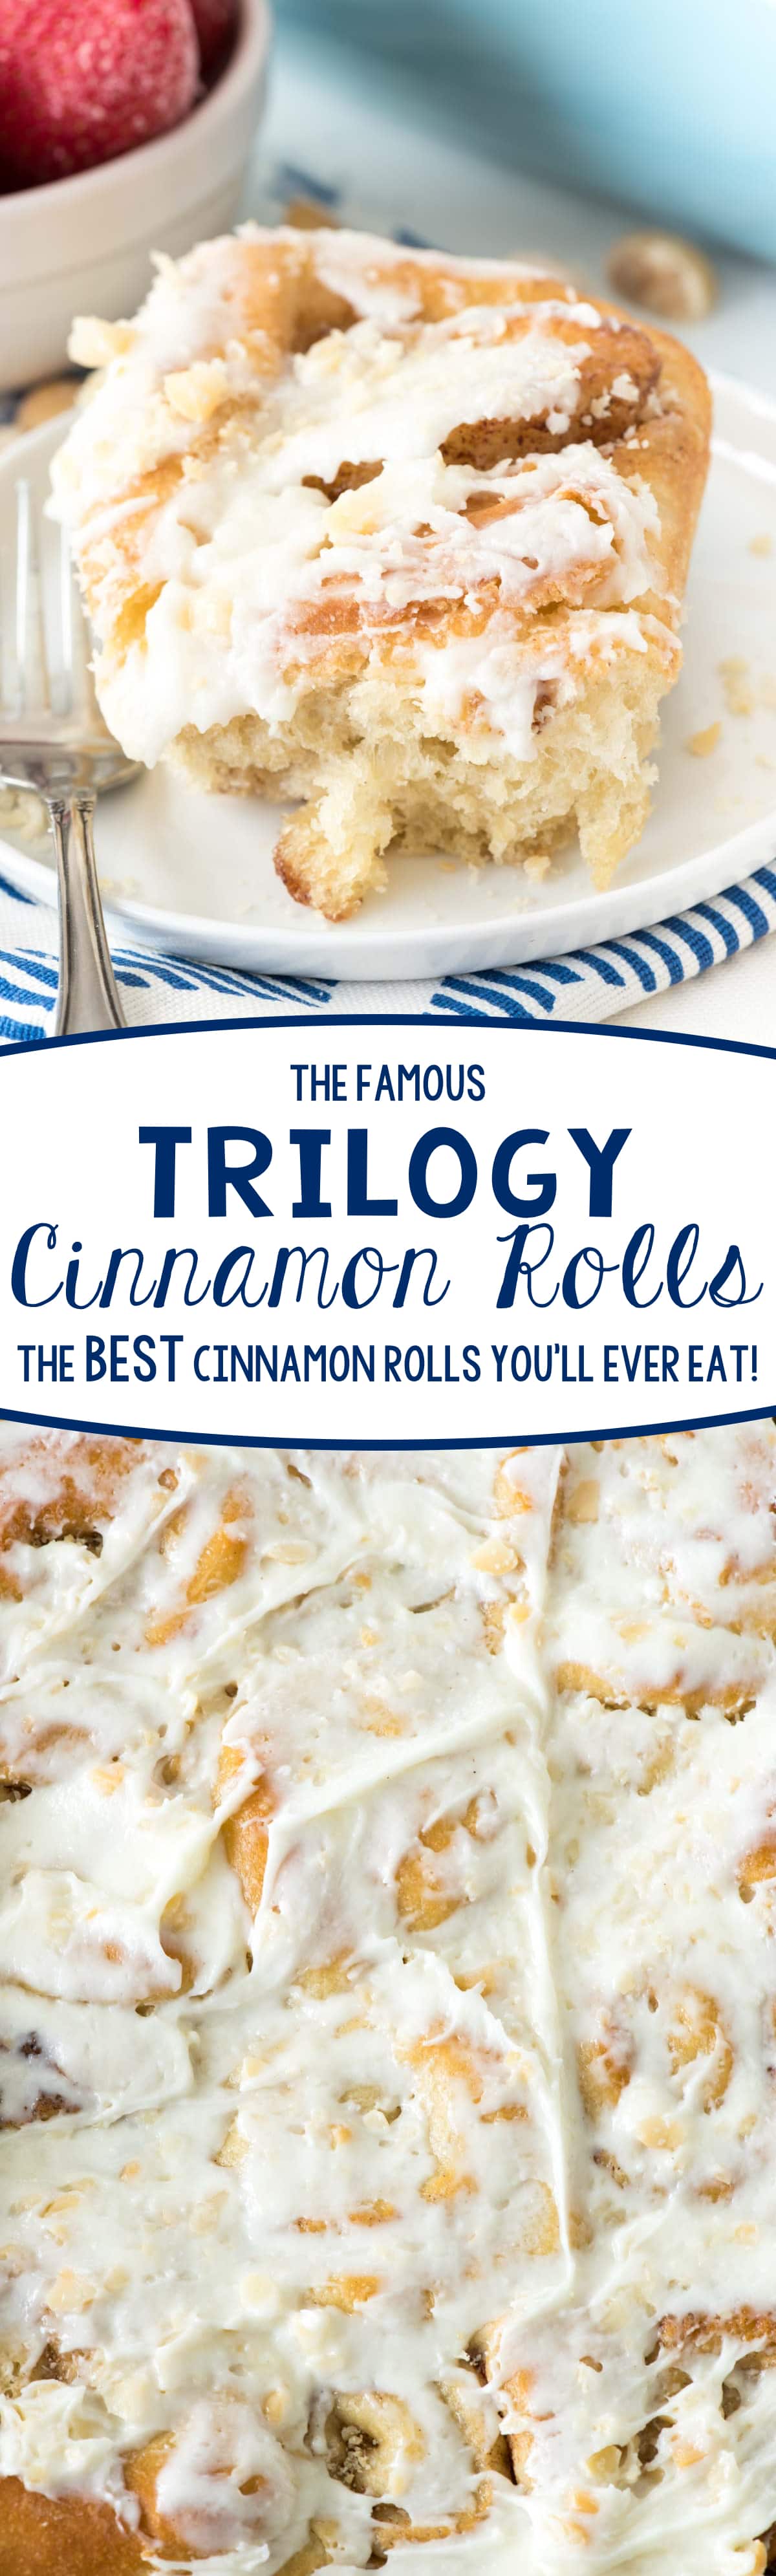 Famous Trilogy Cinnamon Rolls Recipe - this is the BEST CINNAMON ROLL RECIPE I've ever eaten!